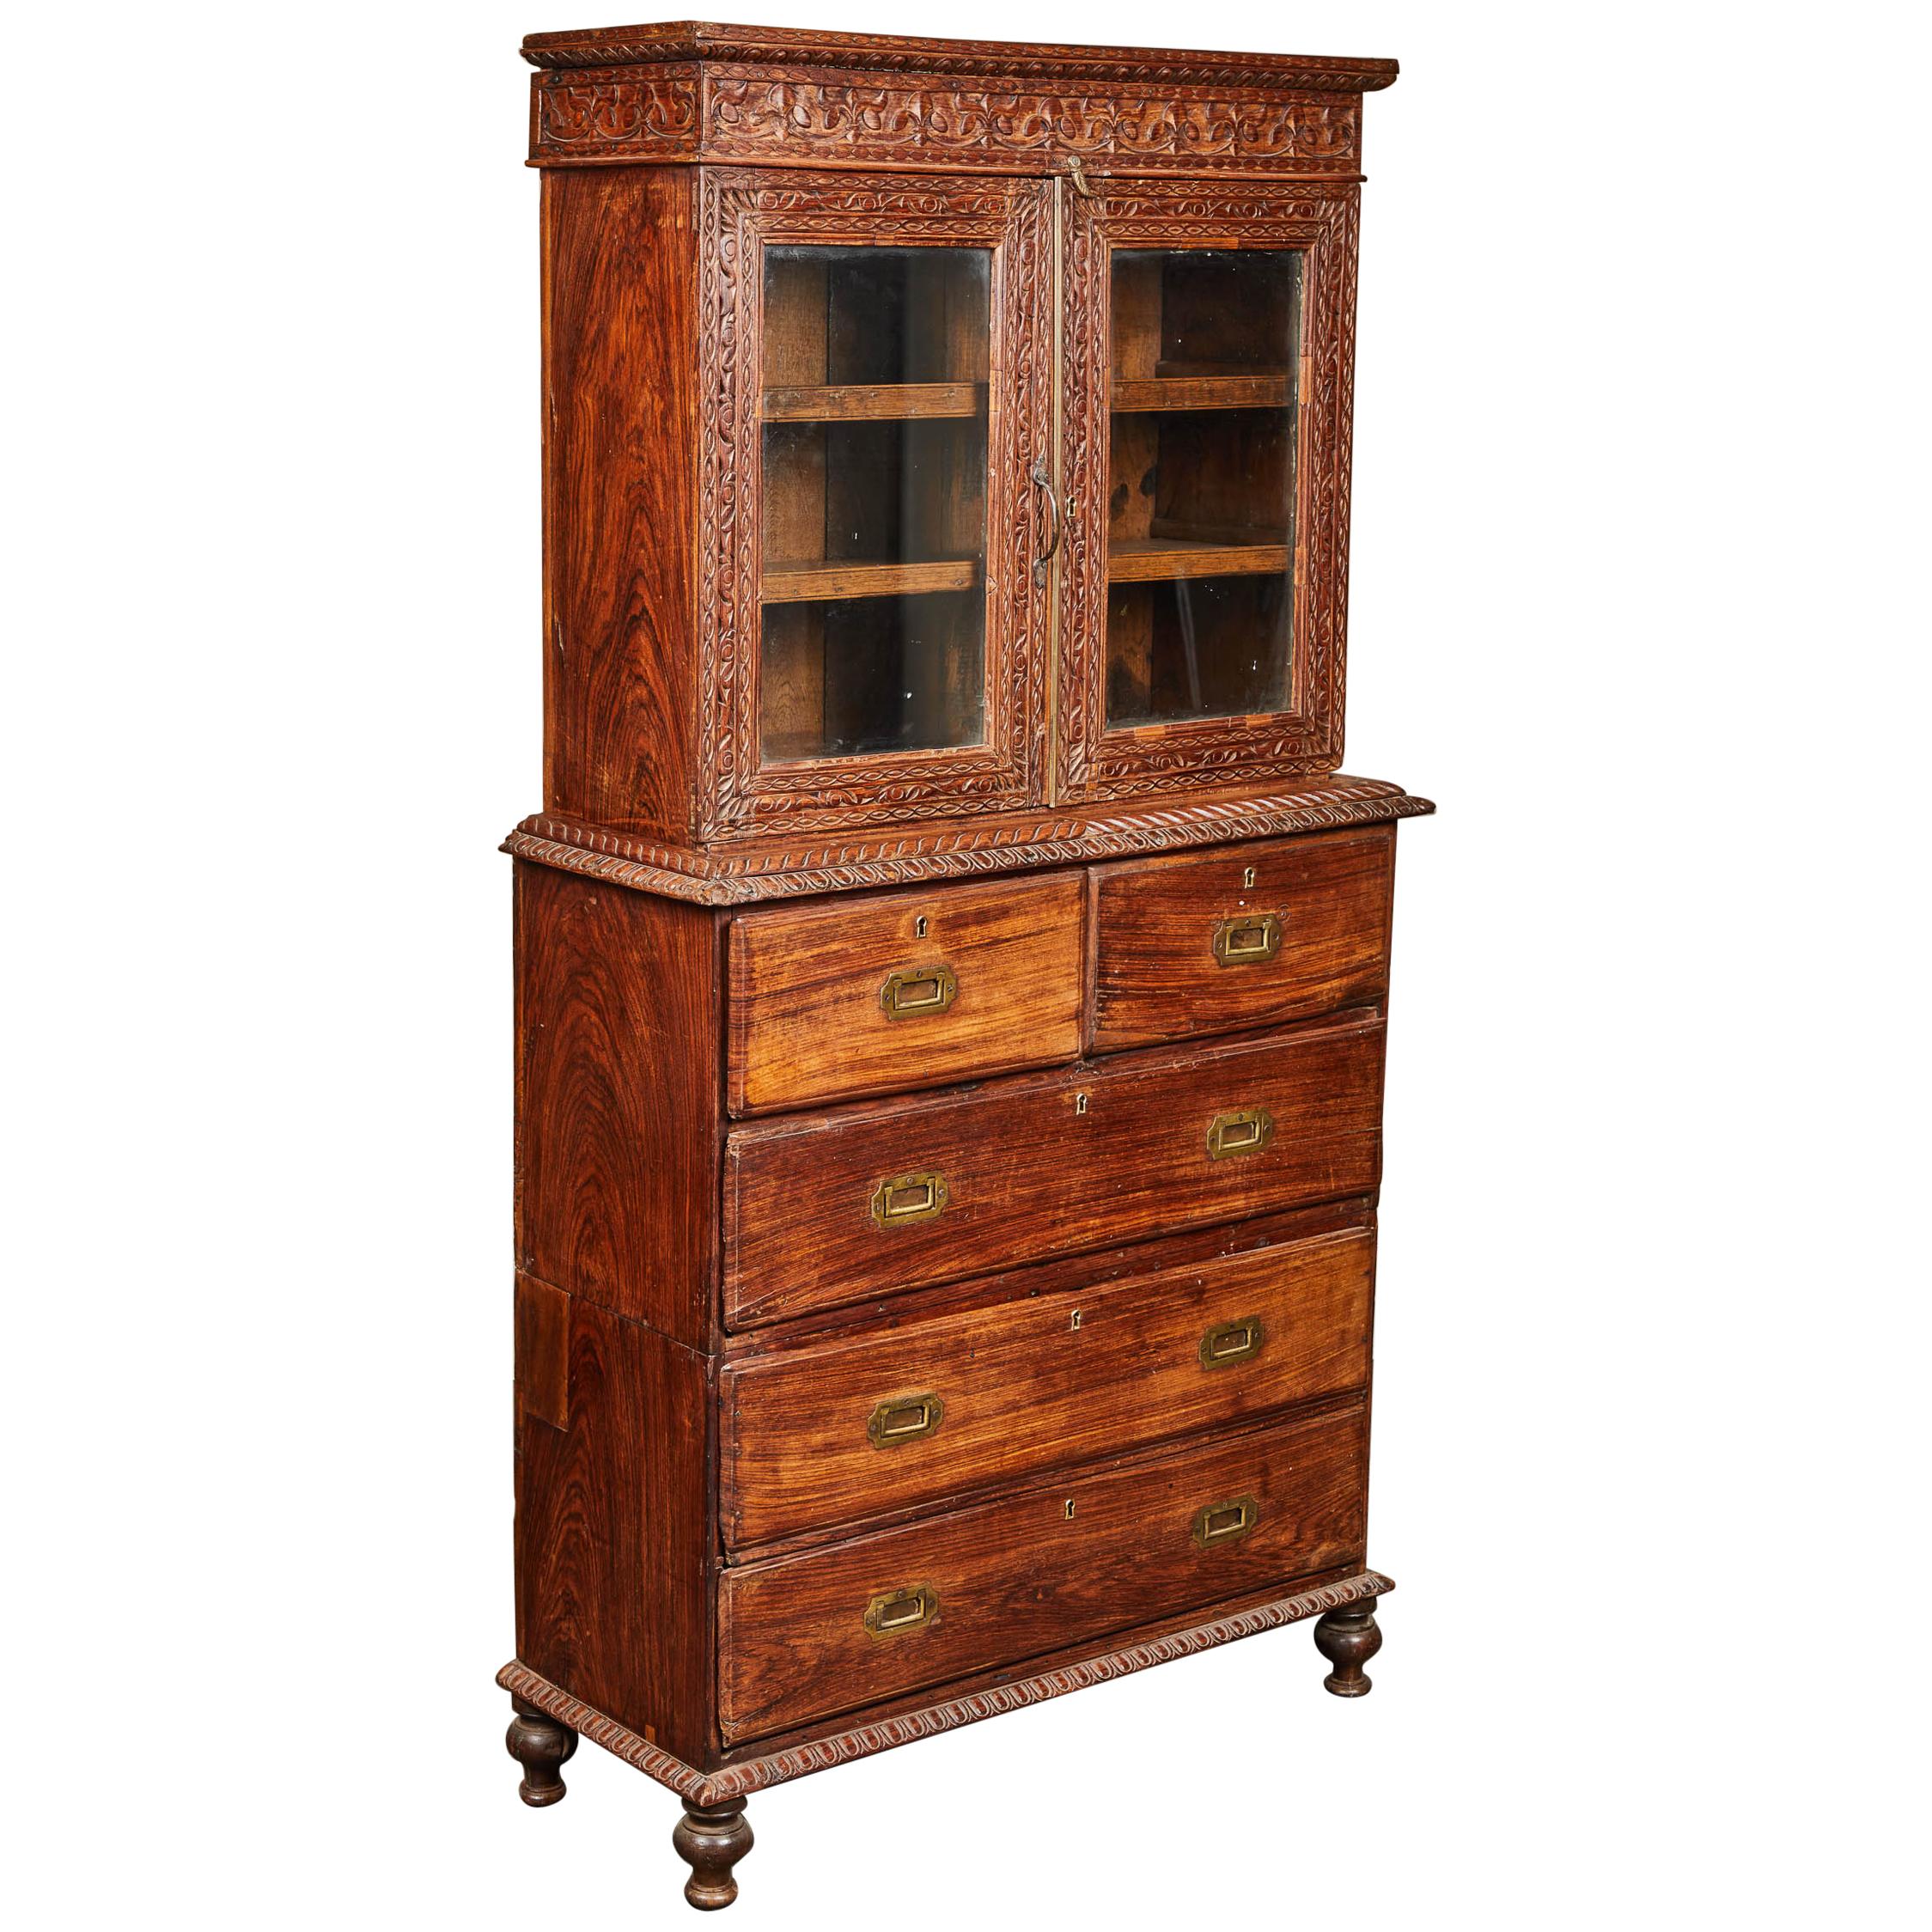 19th Century British Colonial Rosewood Display Cabinet